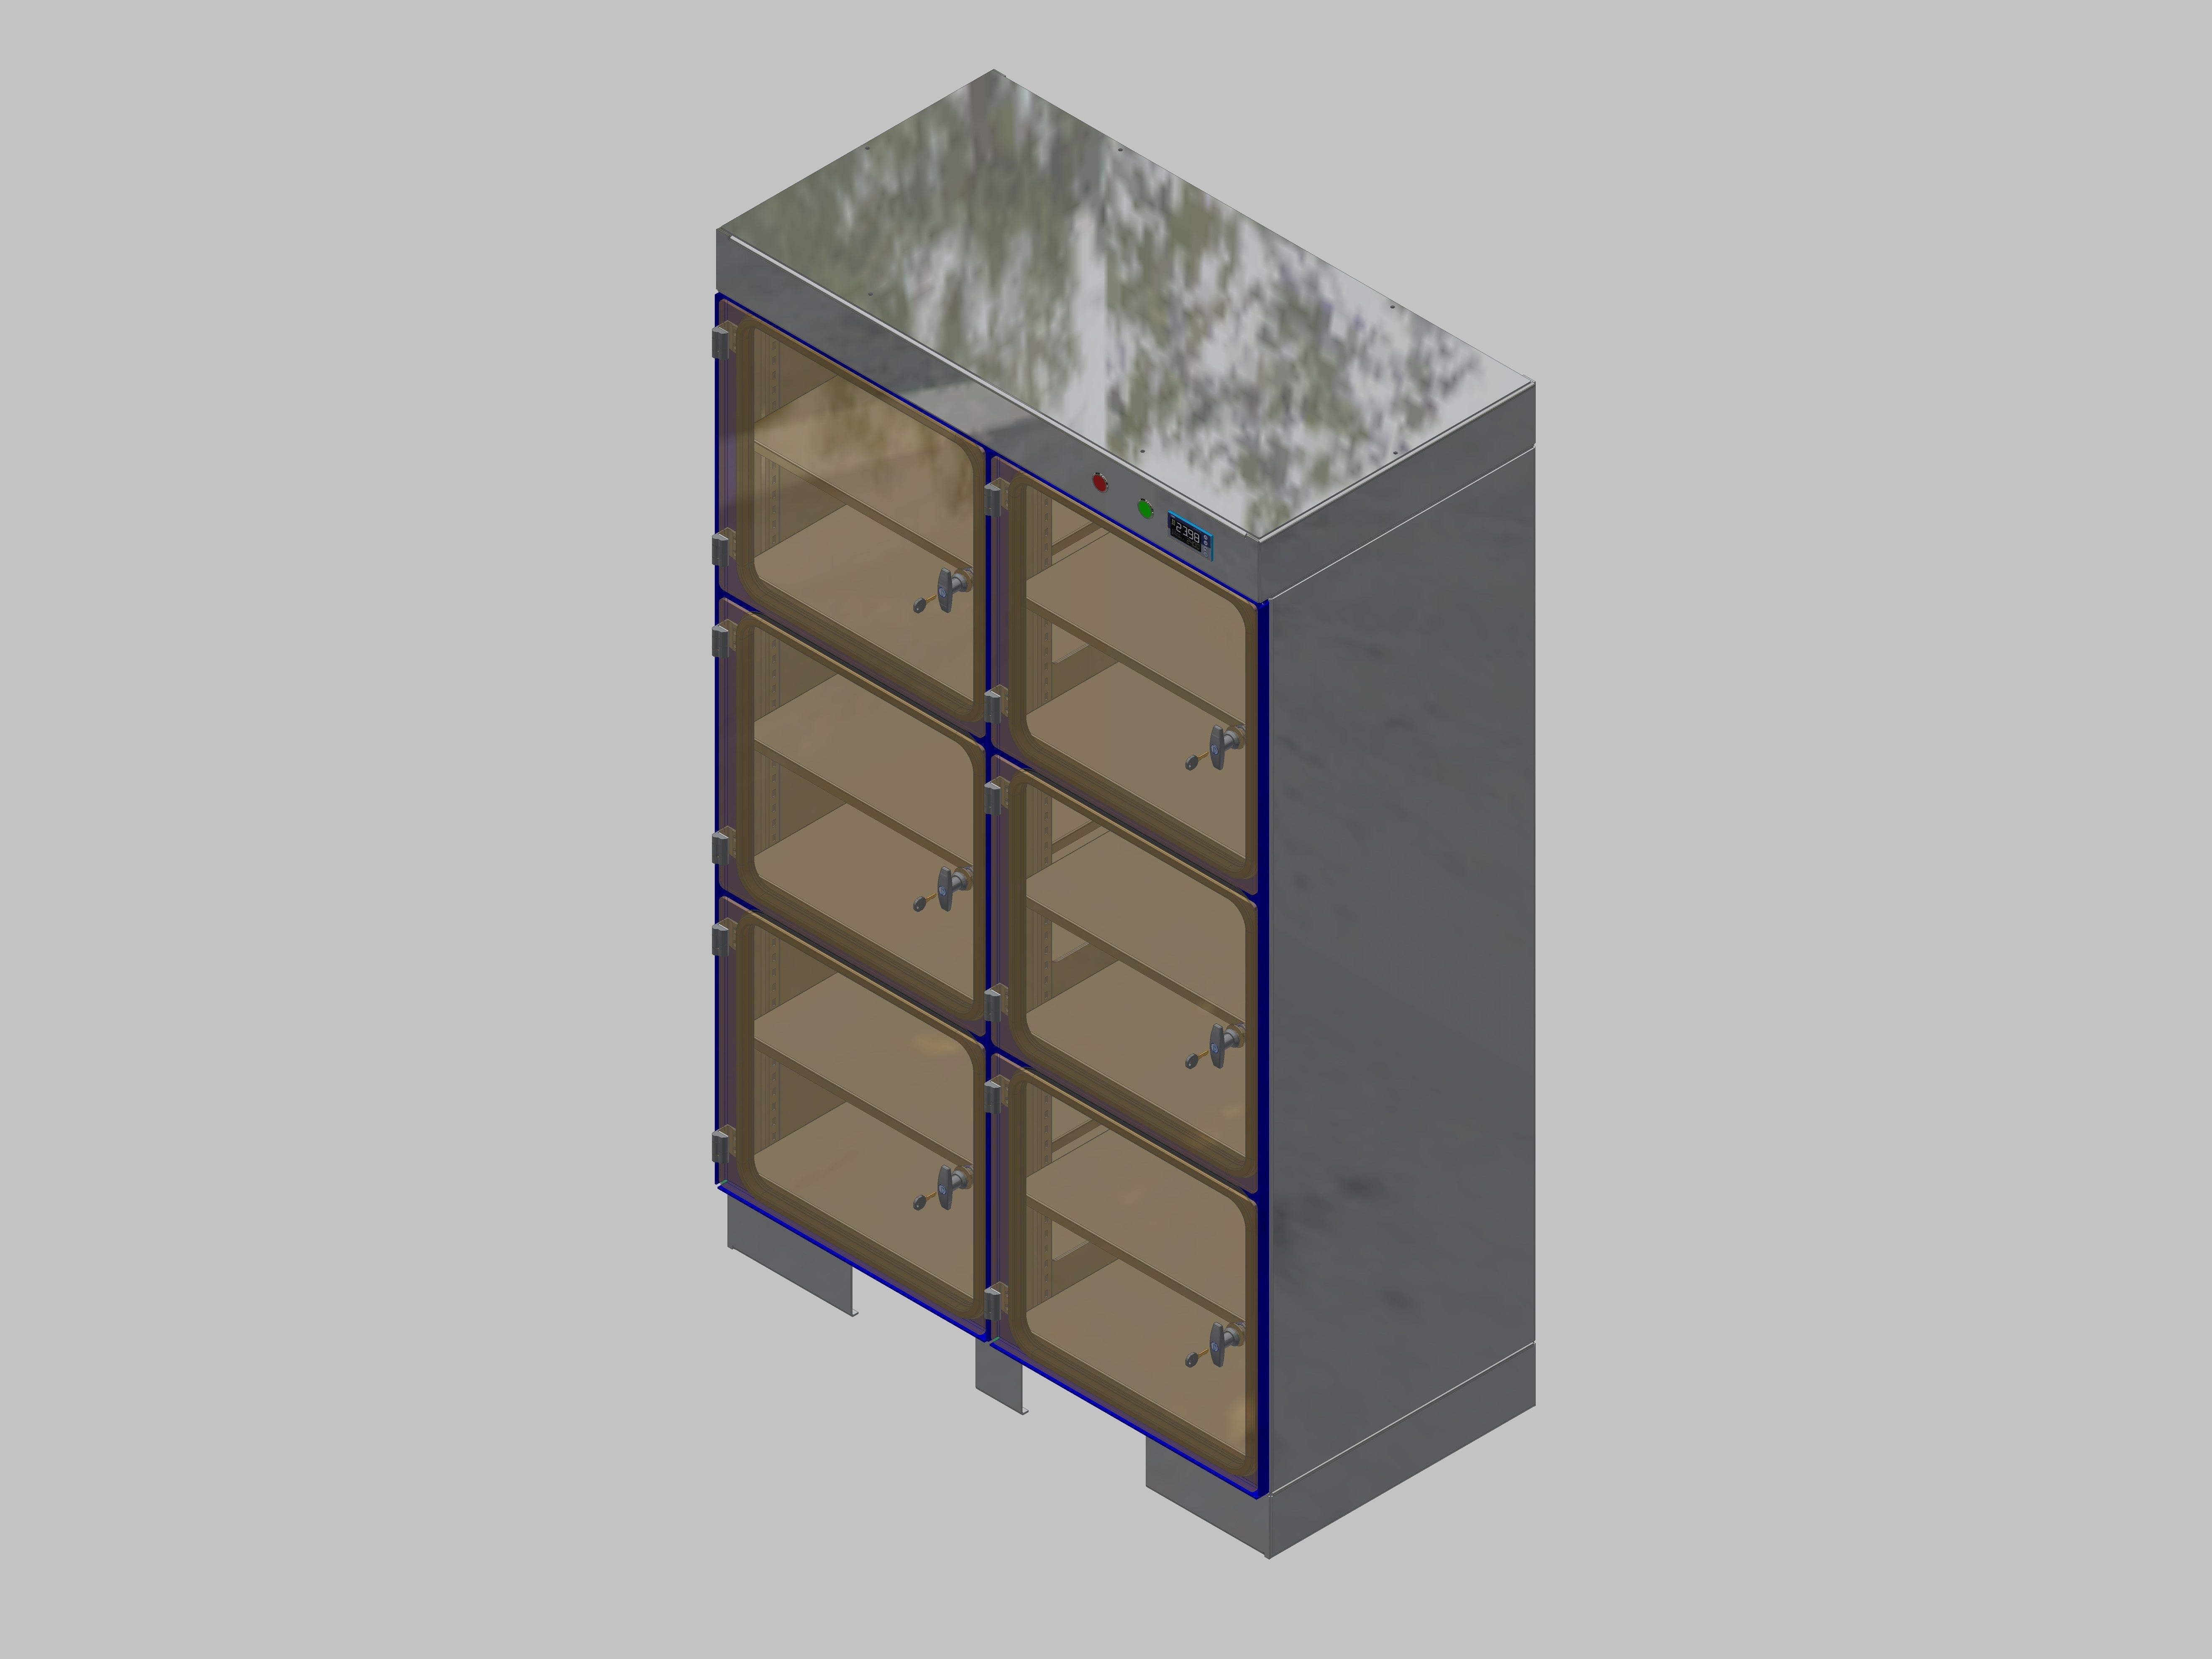 Dry storage cabinet-ITN-1200-6 with 2 shelves per compartment and base design that can be accessed with adjustable feet